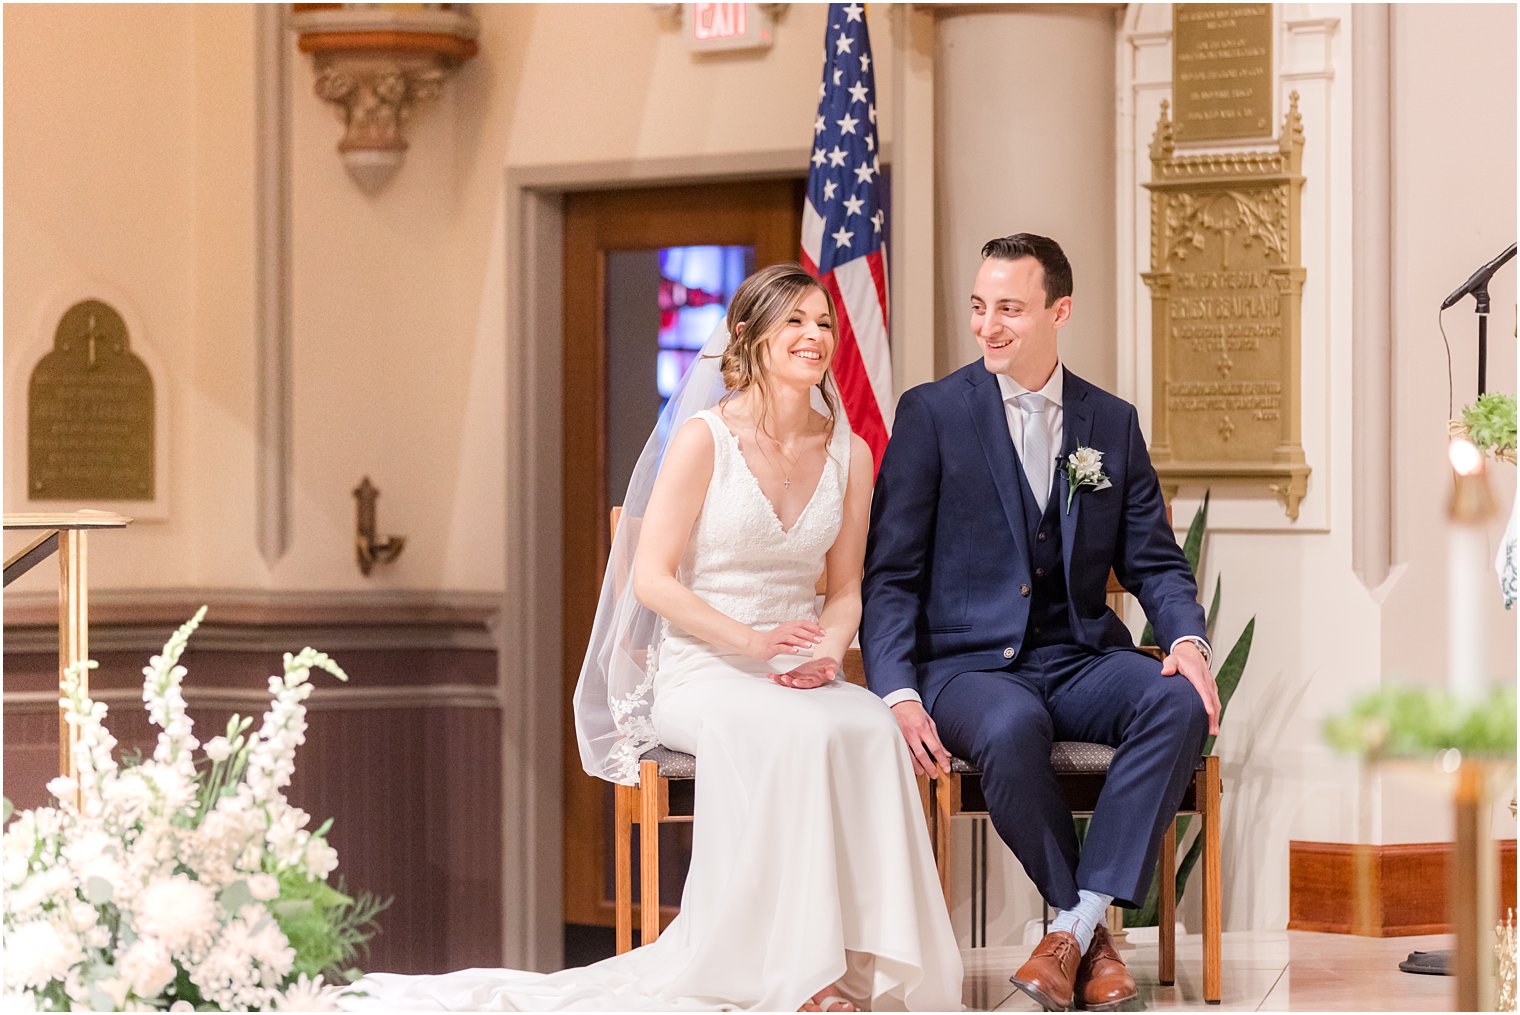 bride and groom laugh sitting together during wedding ceremony at St. Vincent Martyr Church